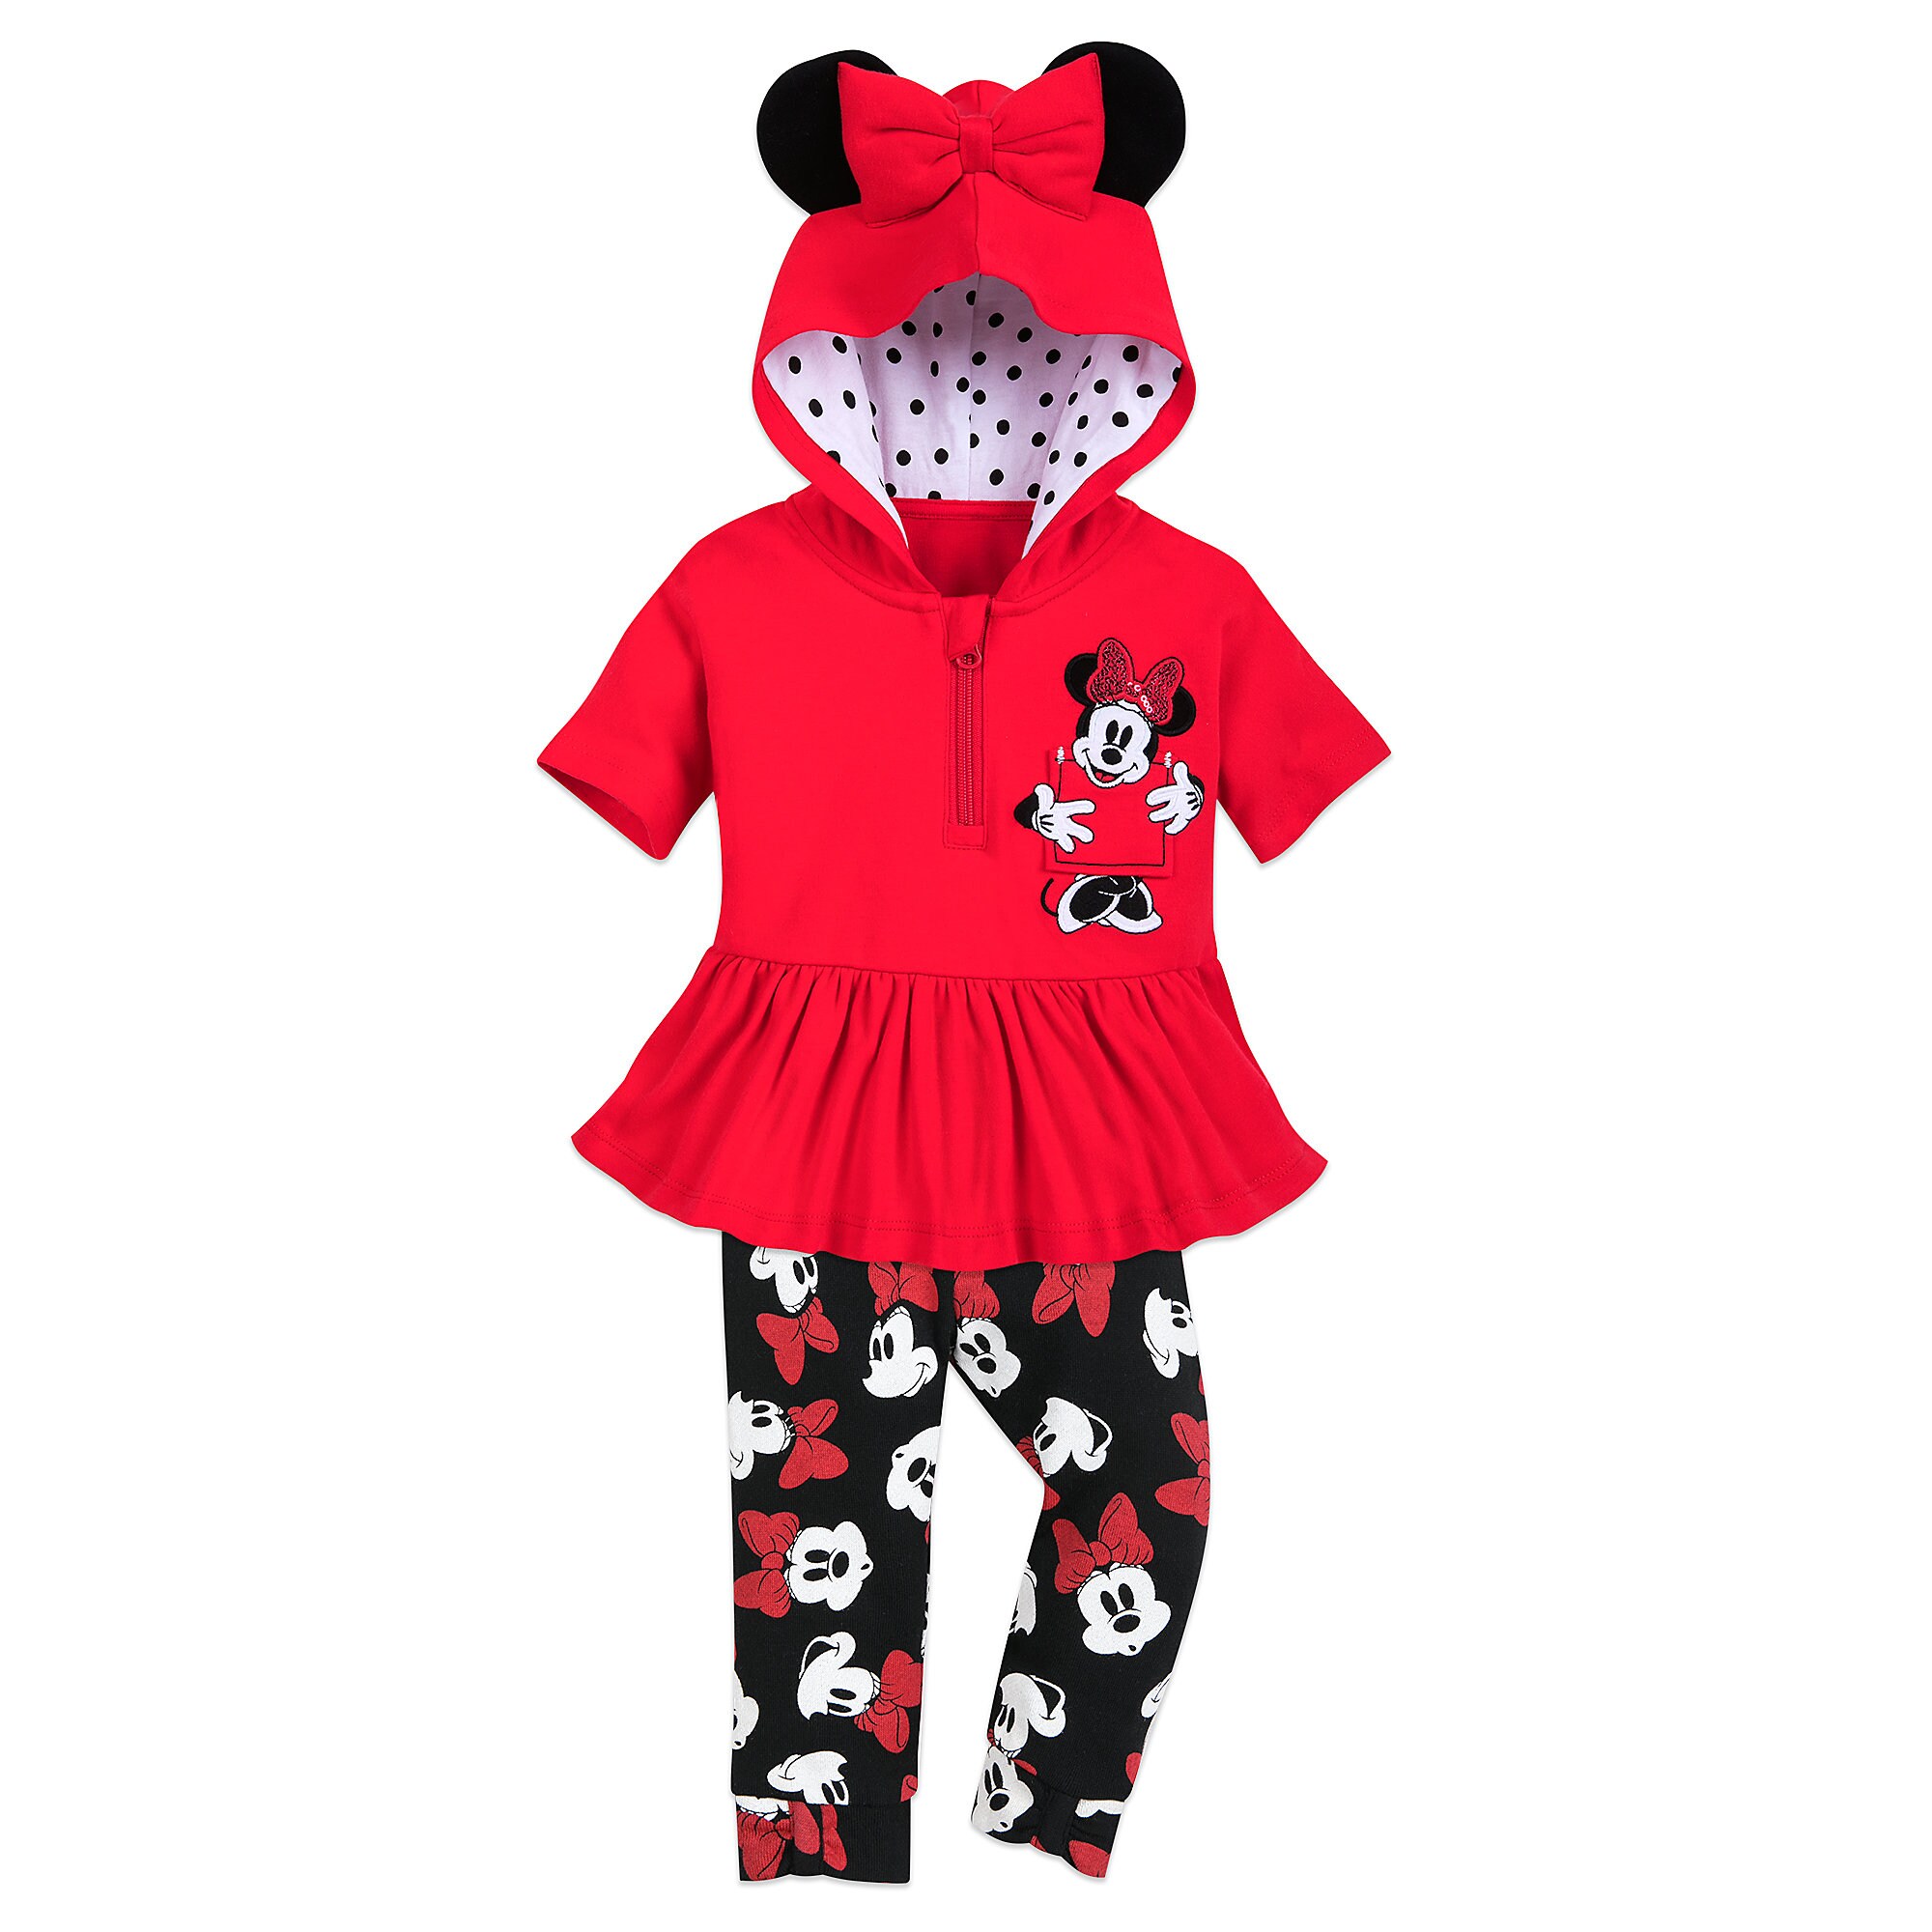 Minnie Mouse Hooded Shirt and Pants Set for Baby